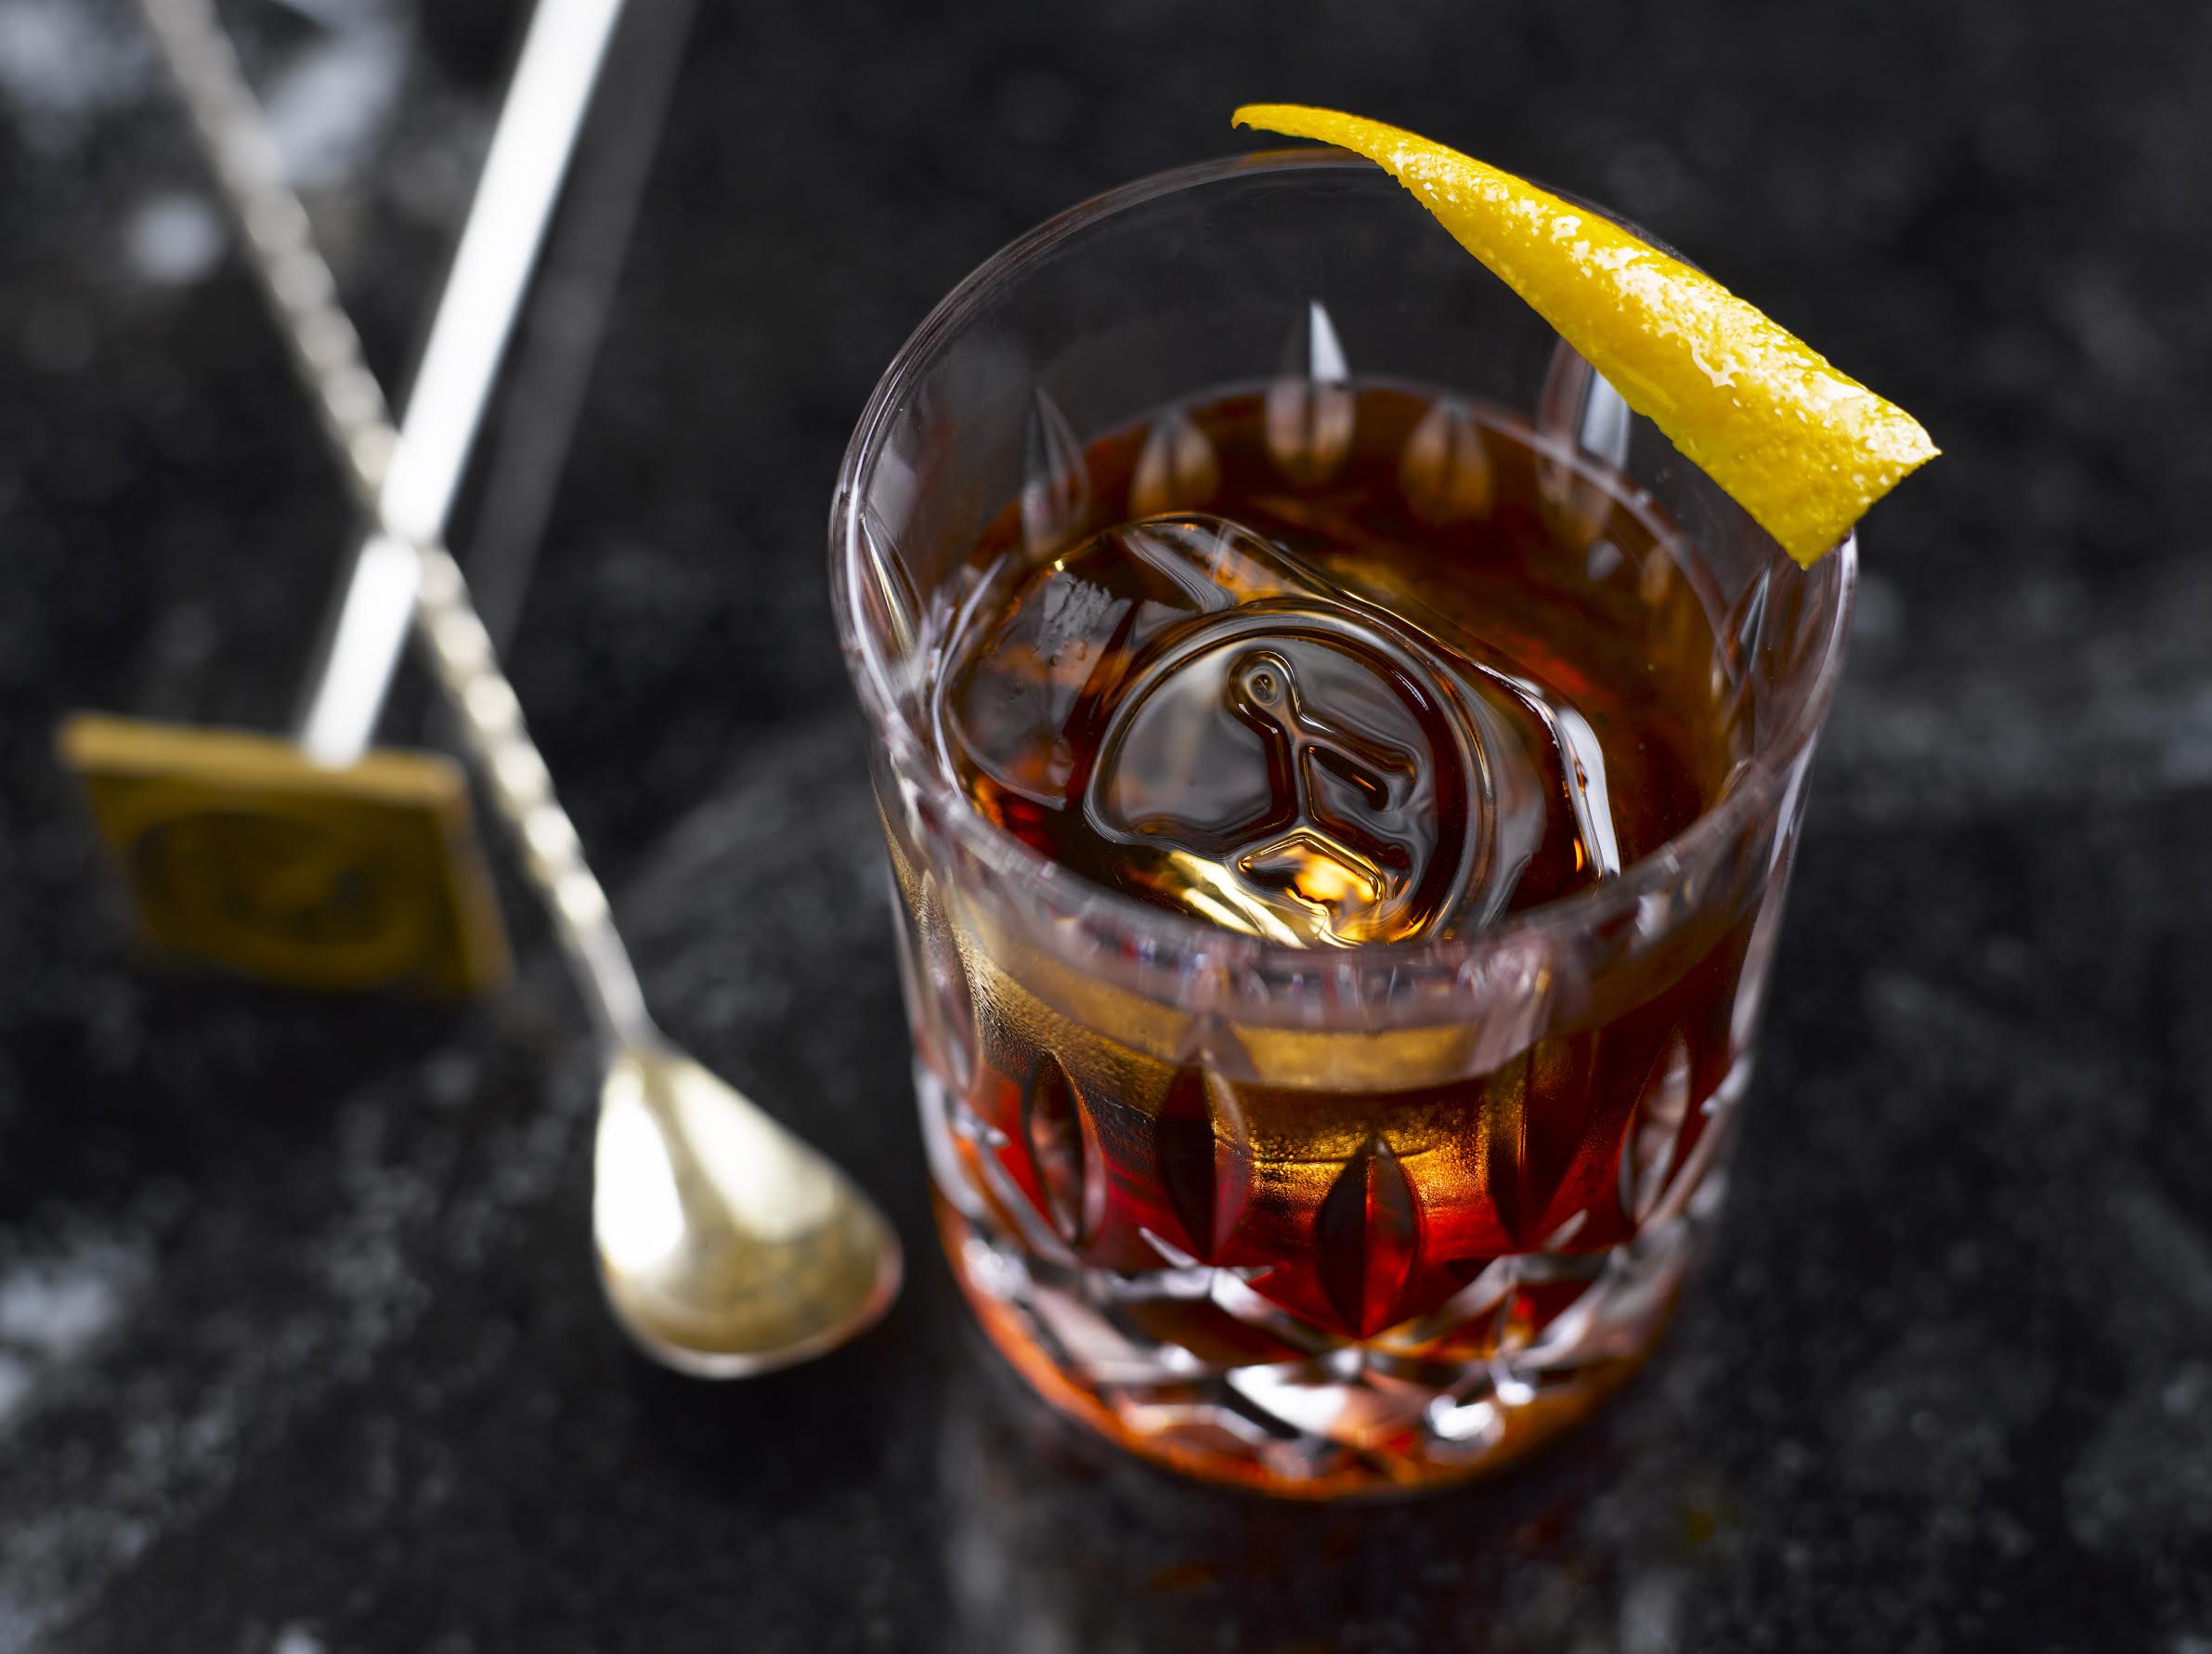 Want a good negroni? Then put these local bars on your radar